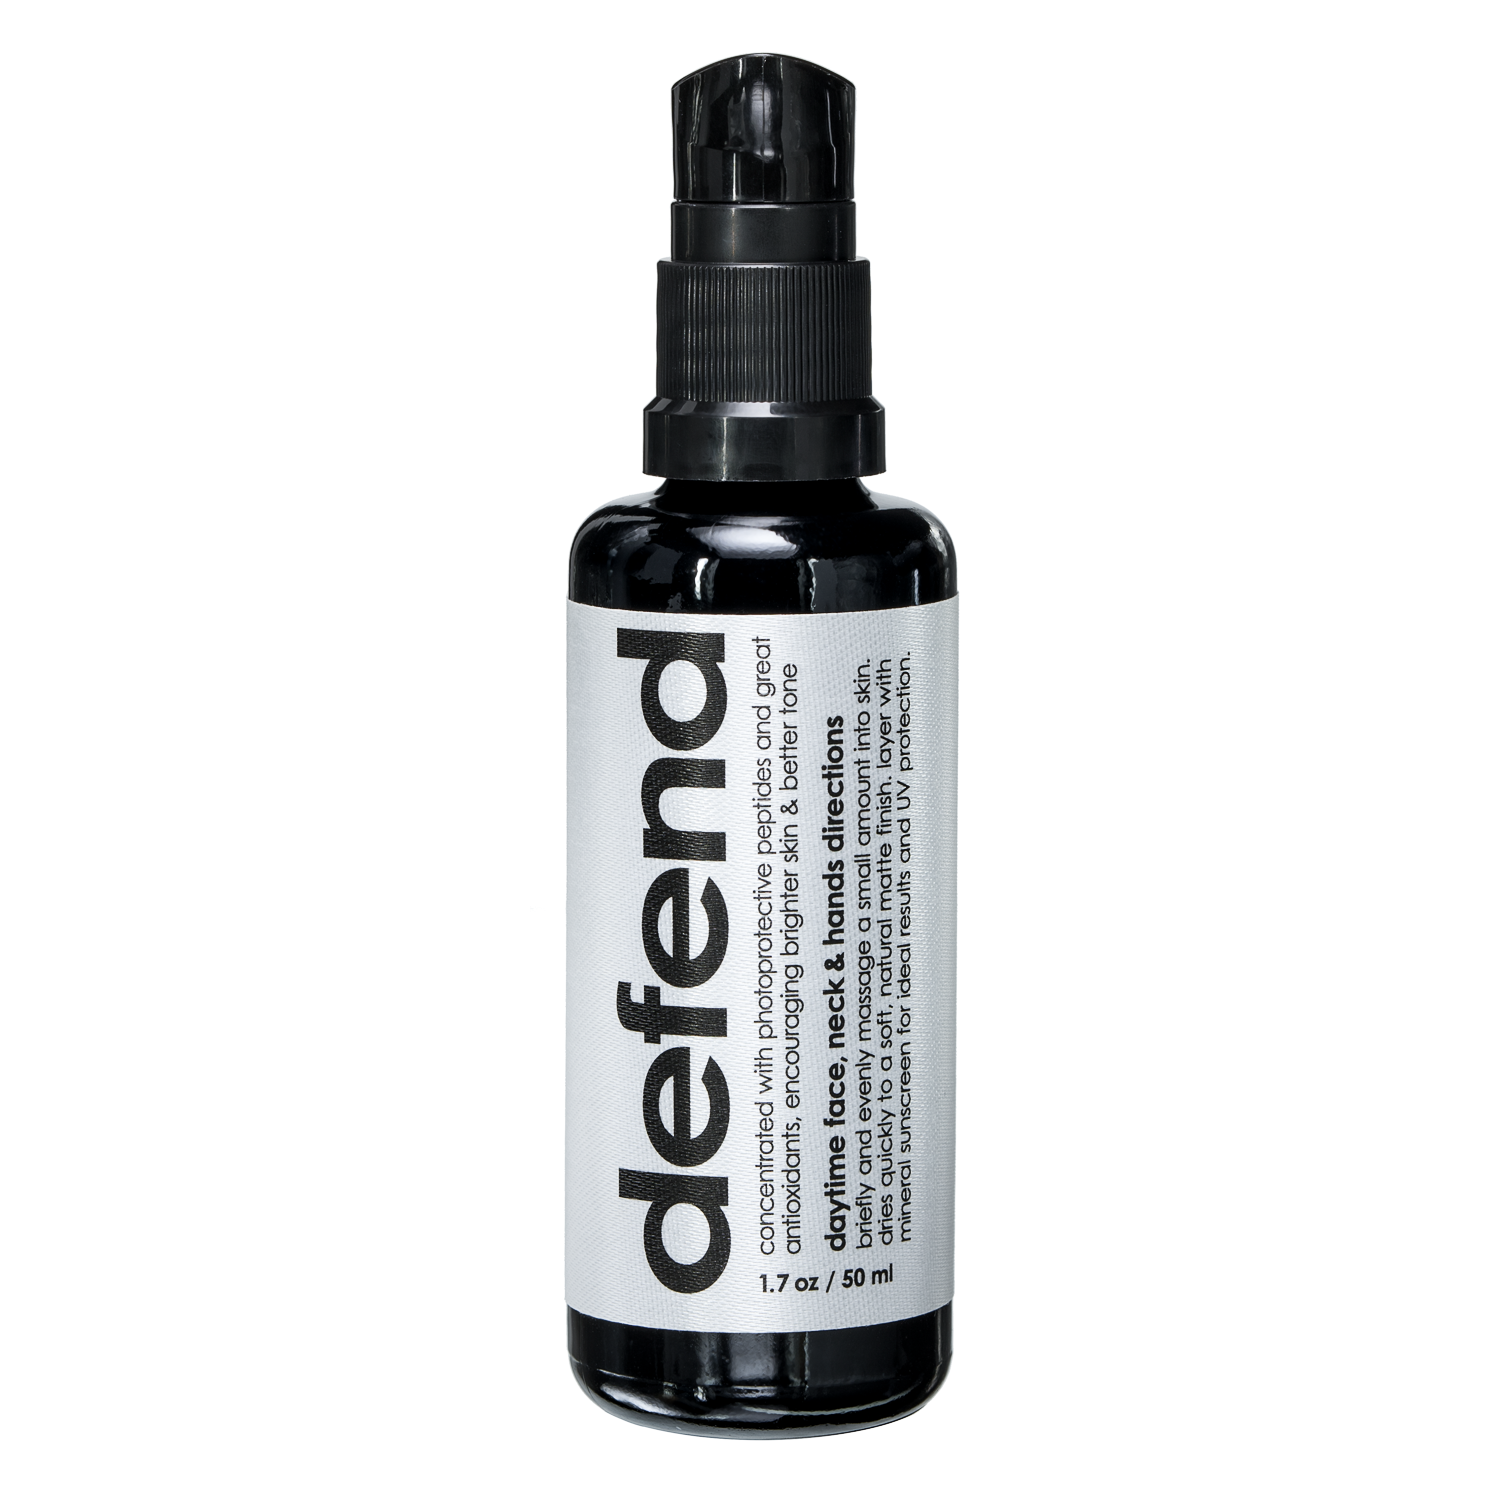 Bottle of Defend Daytime Treatment Serum by Your Best Face